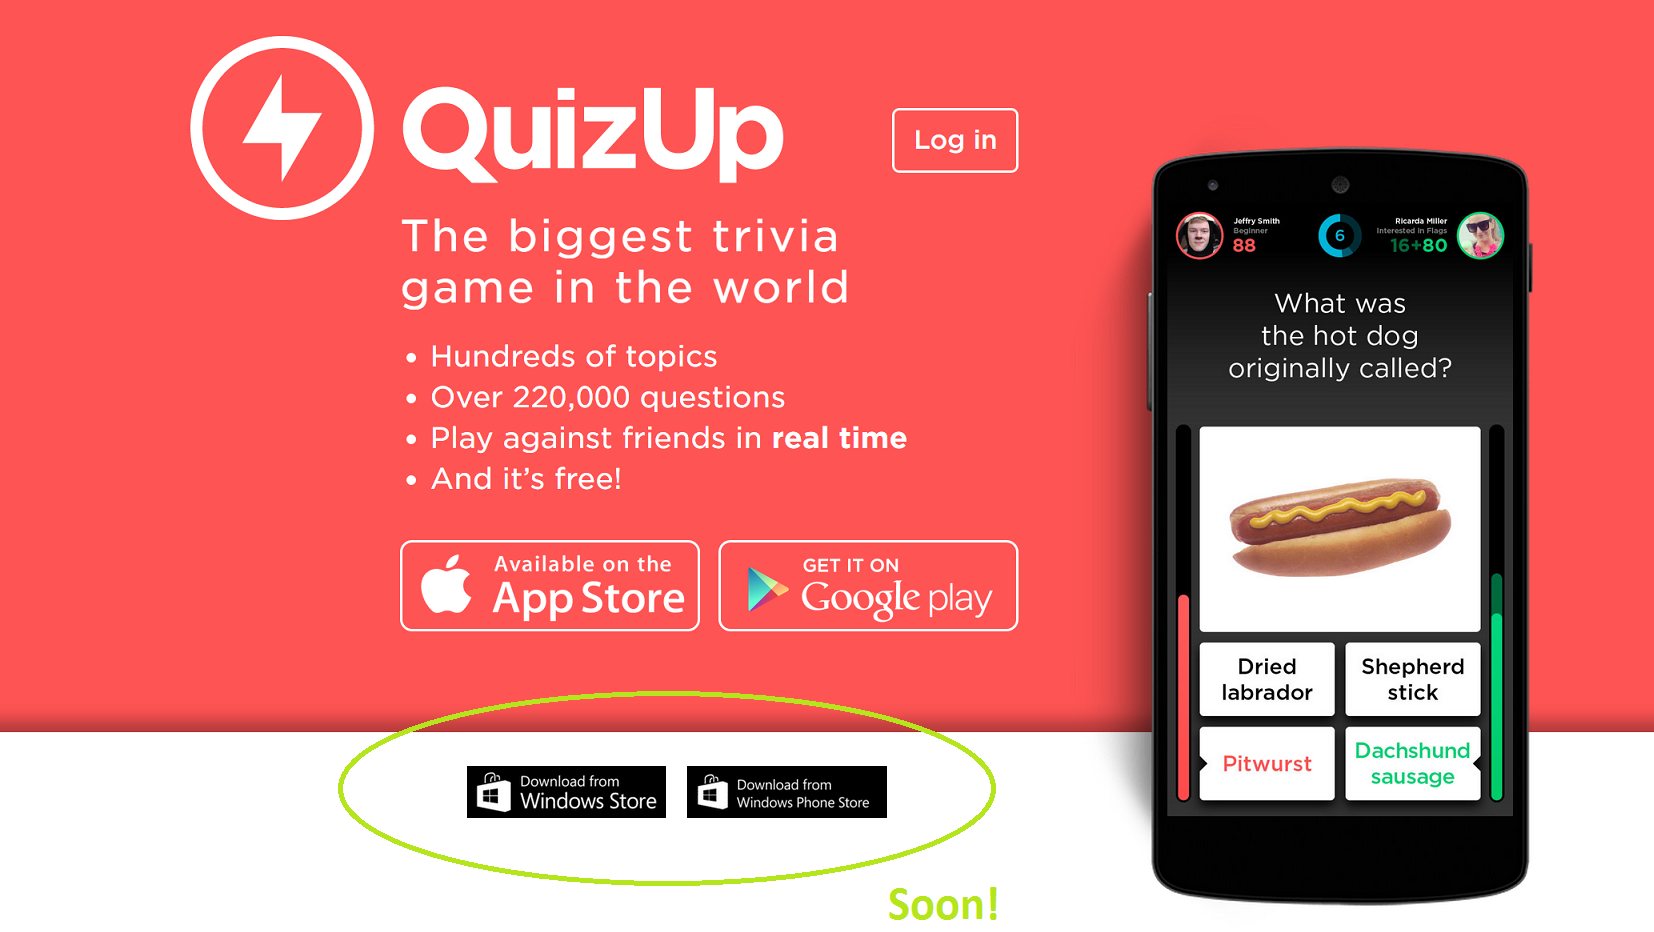 Quizup-soon.png